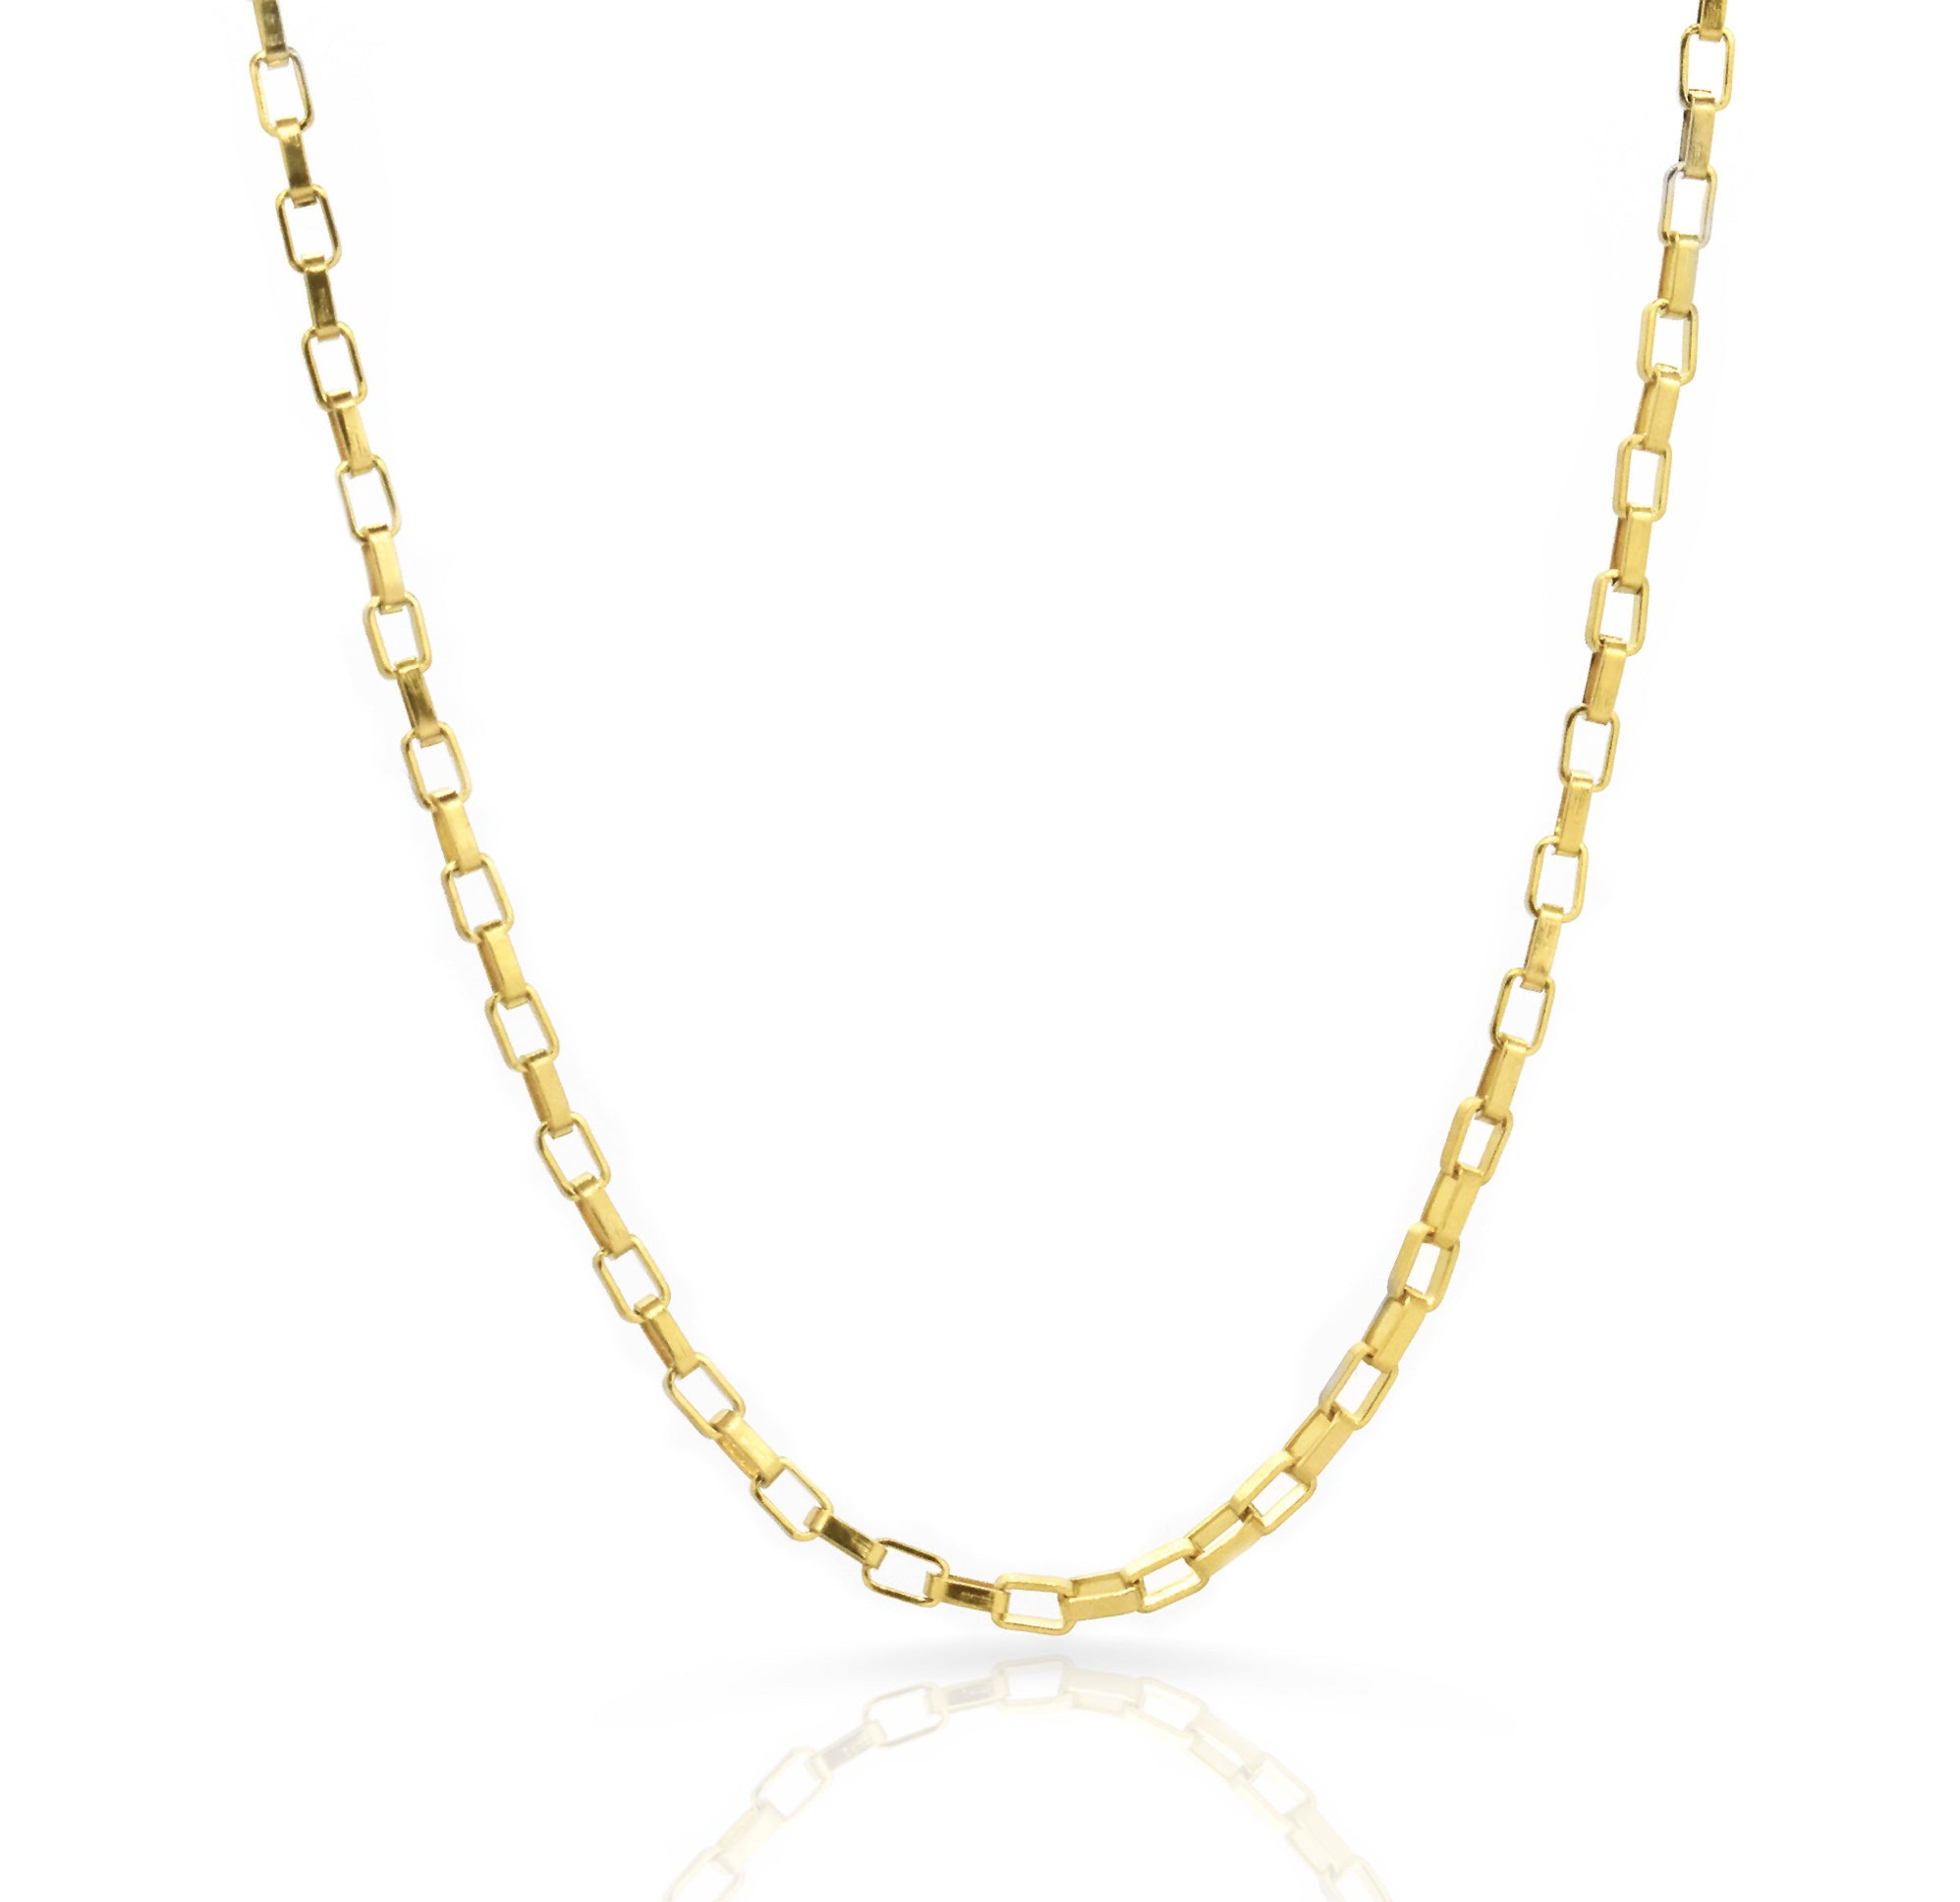 gold box chain necklace waterproof jewelry